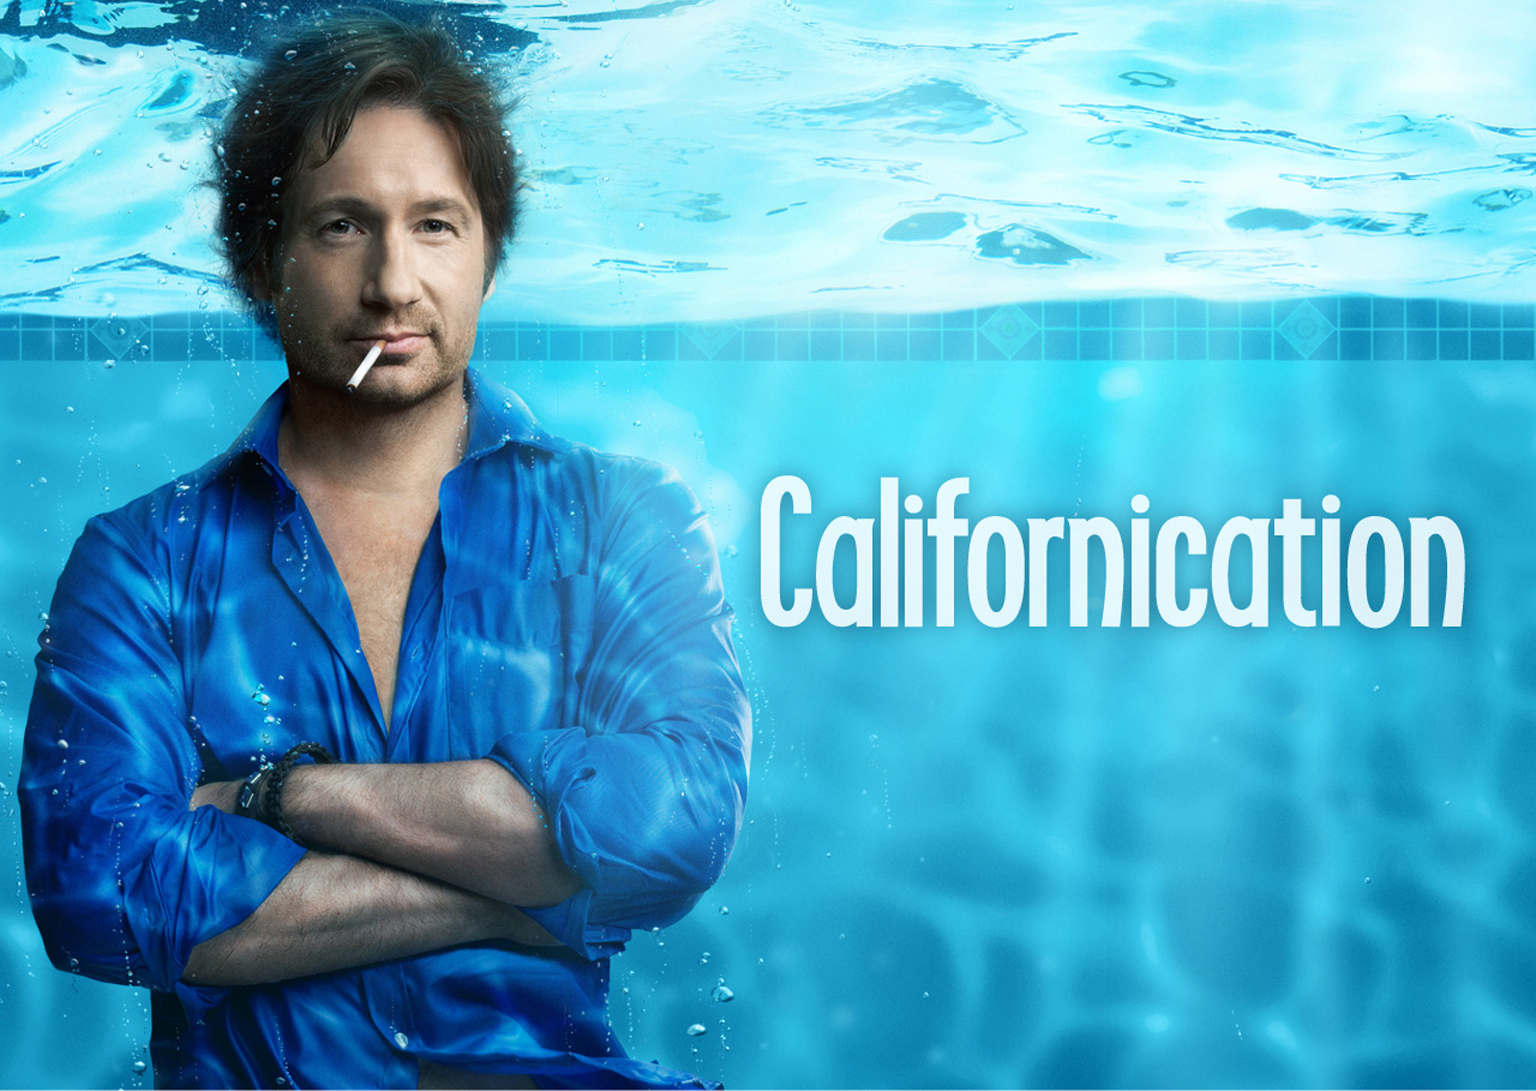 Californication Wallpaper And Background Image Id